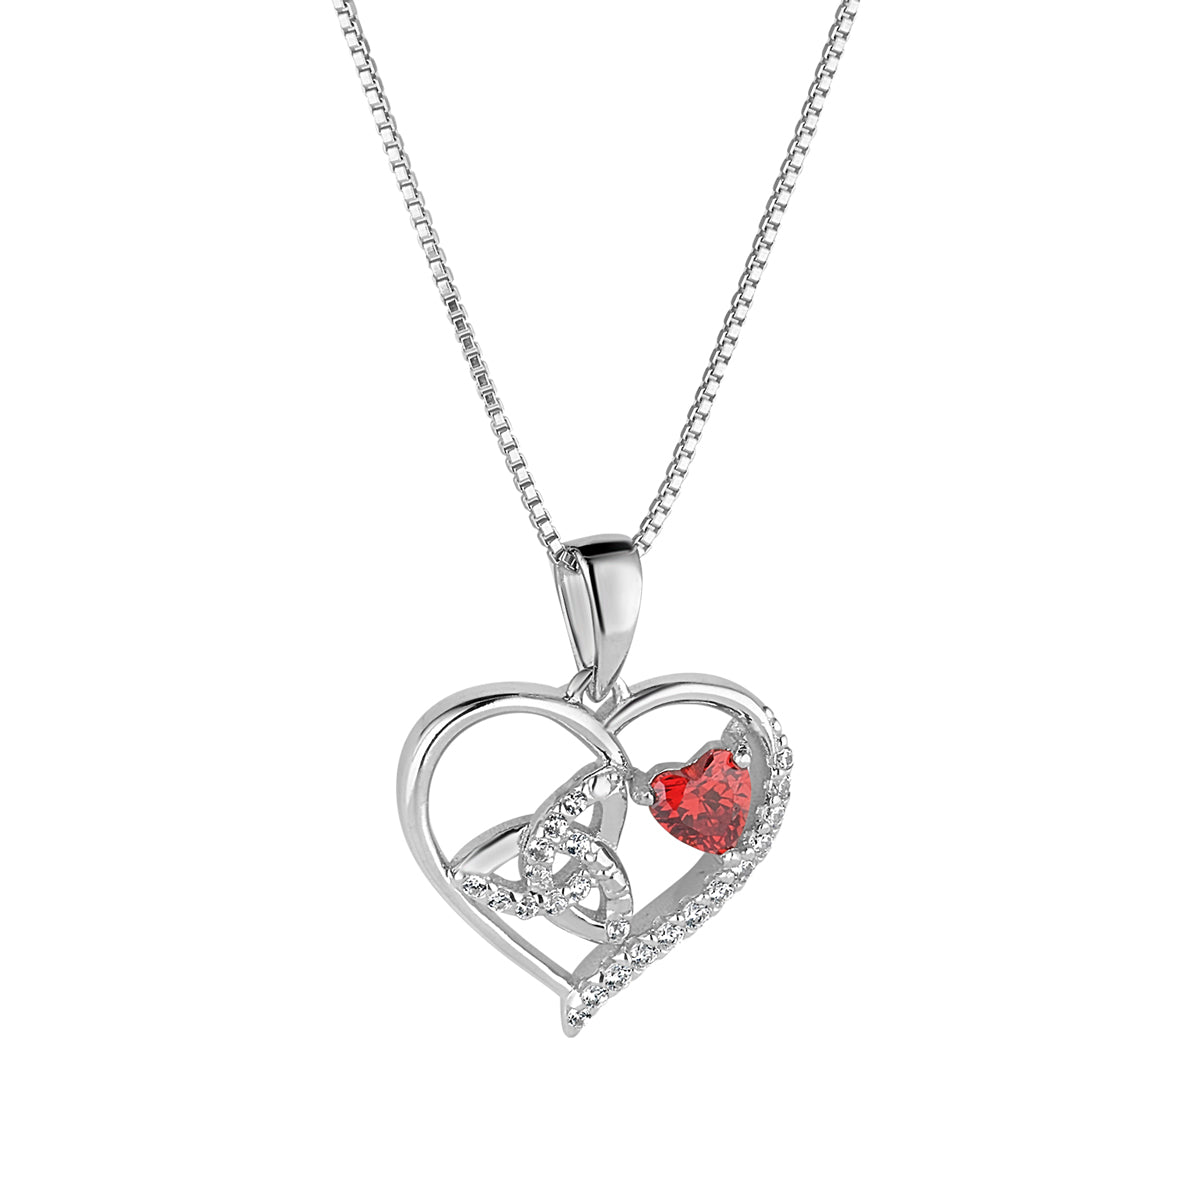 Stock image of heart shaped red crystal glass stone and Trinity Knot symbol in open heart shape Necklace S47101 from Solvar jewellery